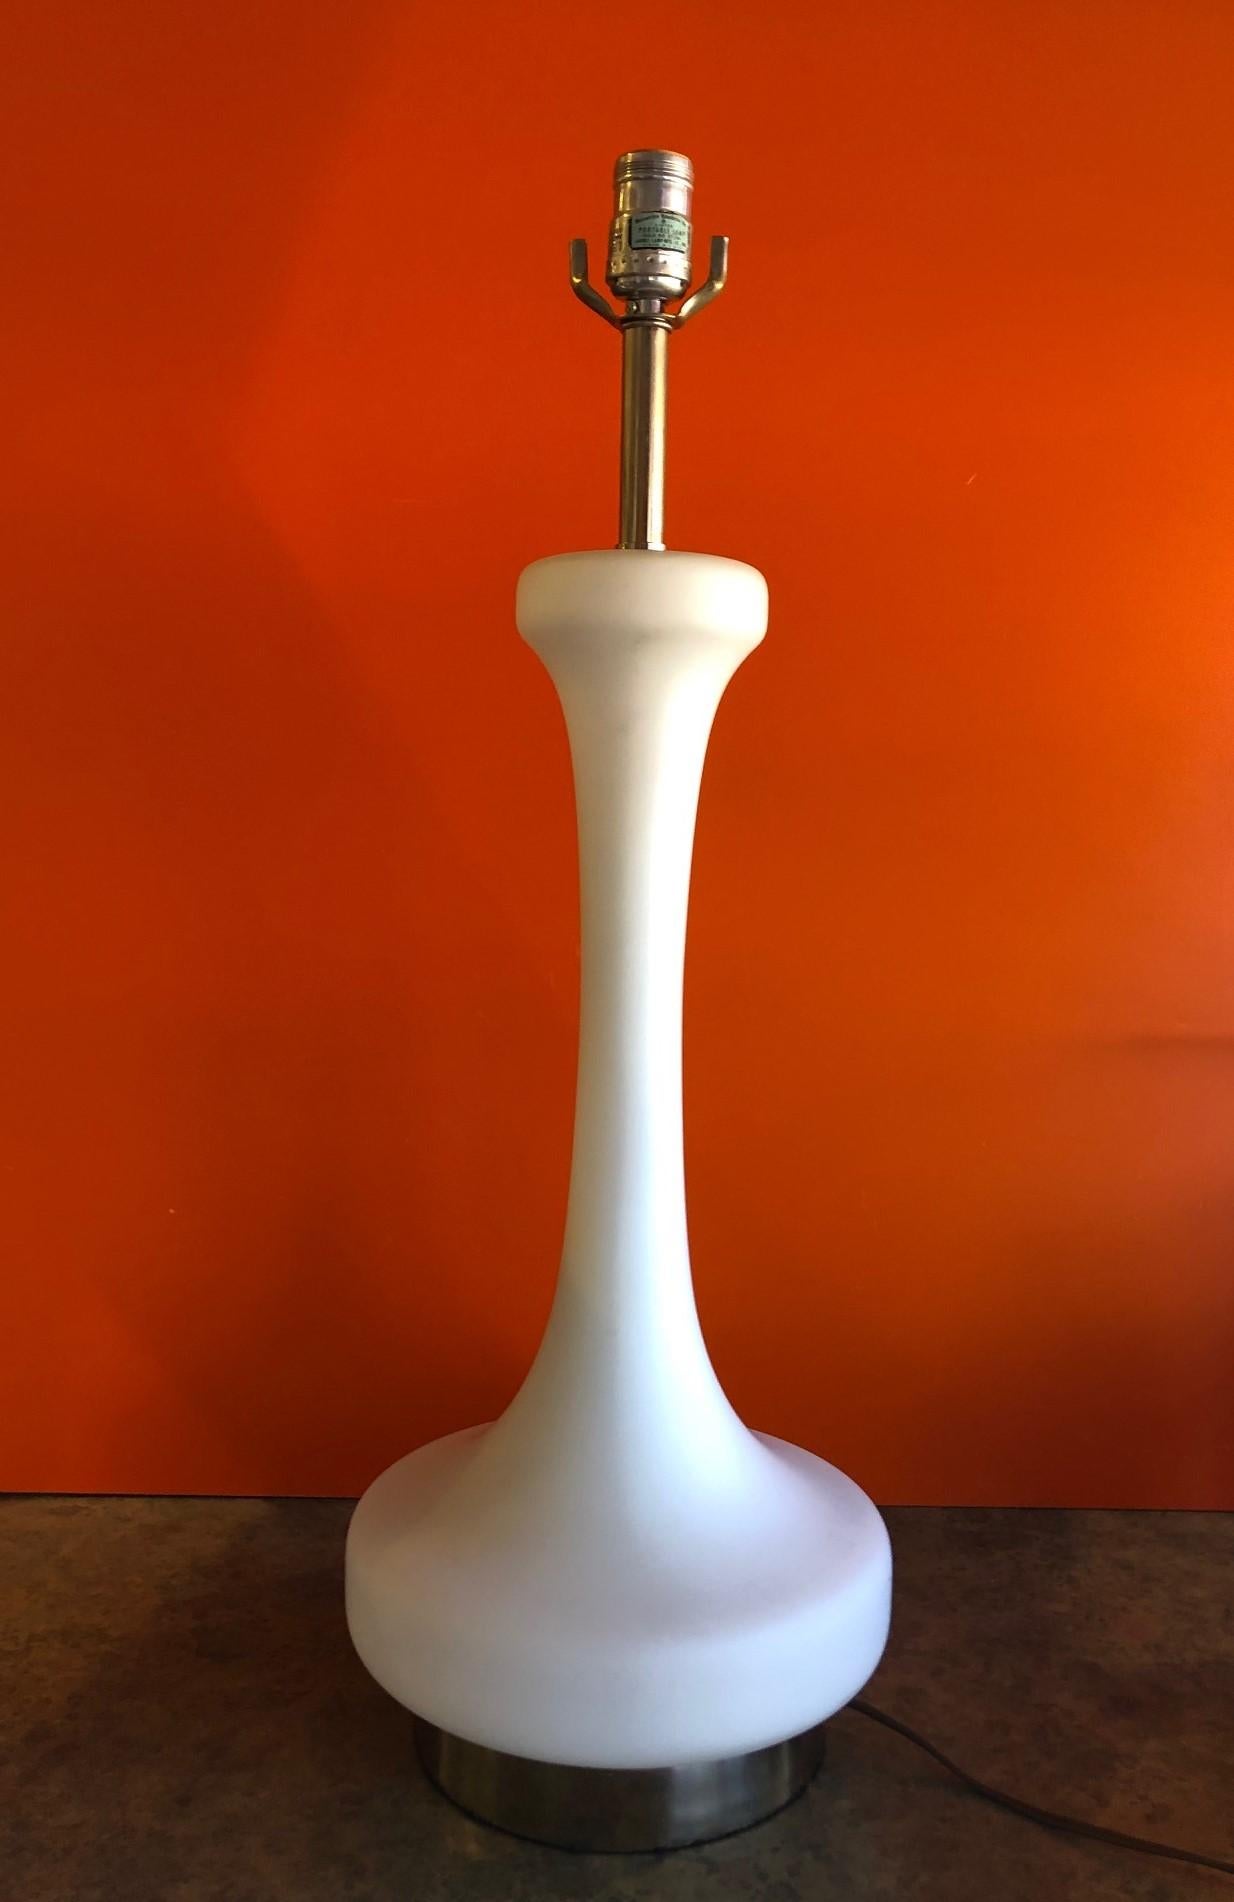 Frosted white glass lamp with lighted base by Laurel Lamp Co, circa 1960s. The piece has an interior illuminated base that can be turned on and off that sits on a chrome base. This is a very cool and rare piece!